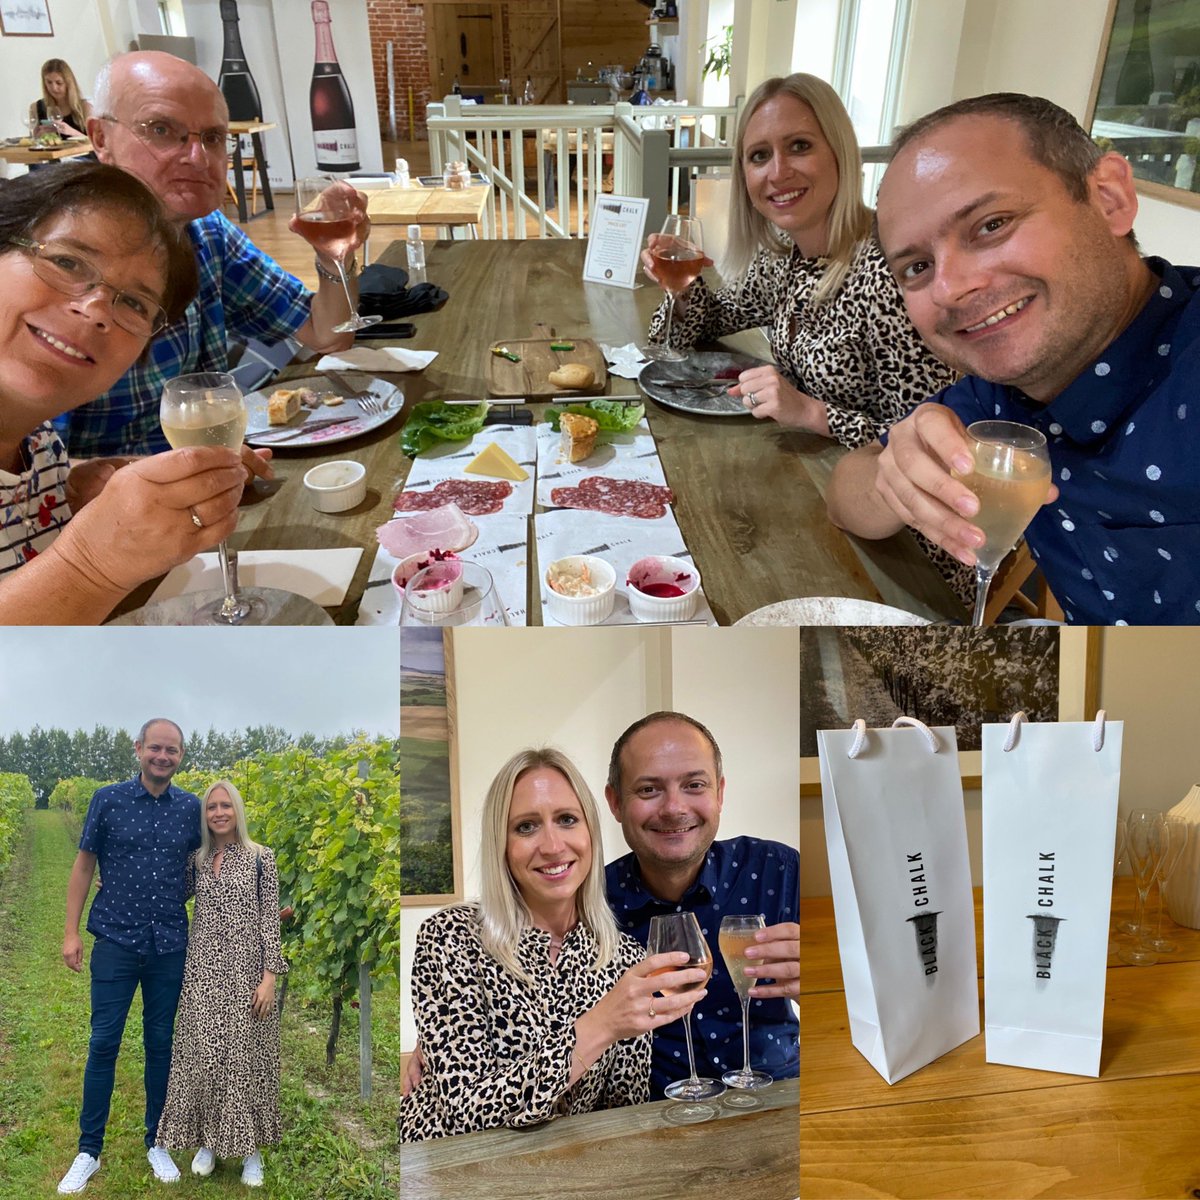 On Thursday @jamjarjem83 kindly organised a suprise trip to @BlackChalkWine. Really interesting to see how fine sparking wines are produced from grape to bottle and of course lovely to sample them😊🥂. A really relaxing and lovely way to spend our @UHSFT #Wellbeingday 💙💙